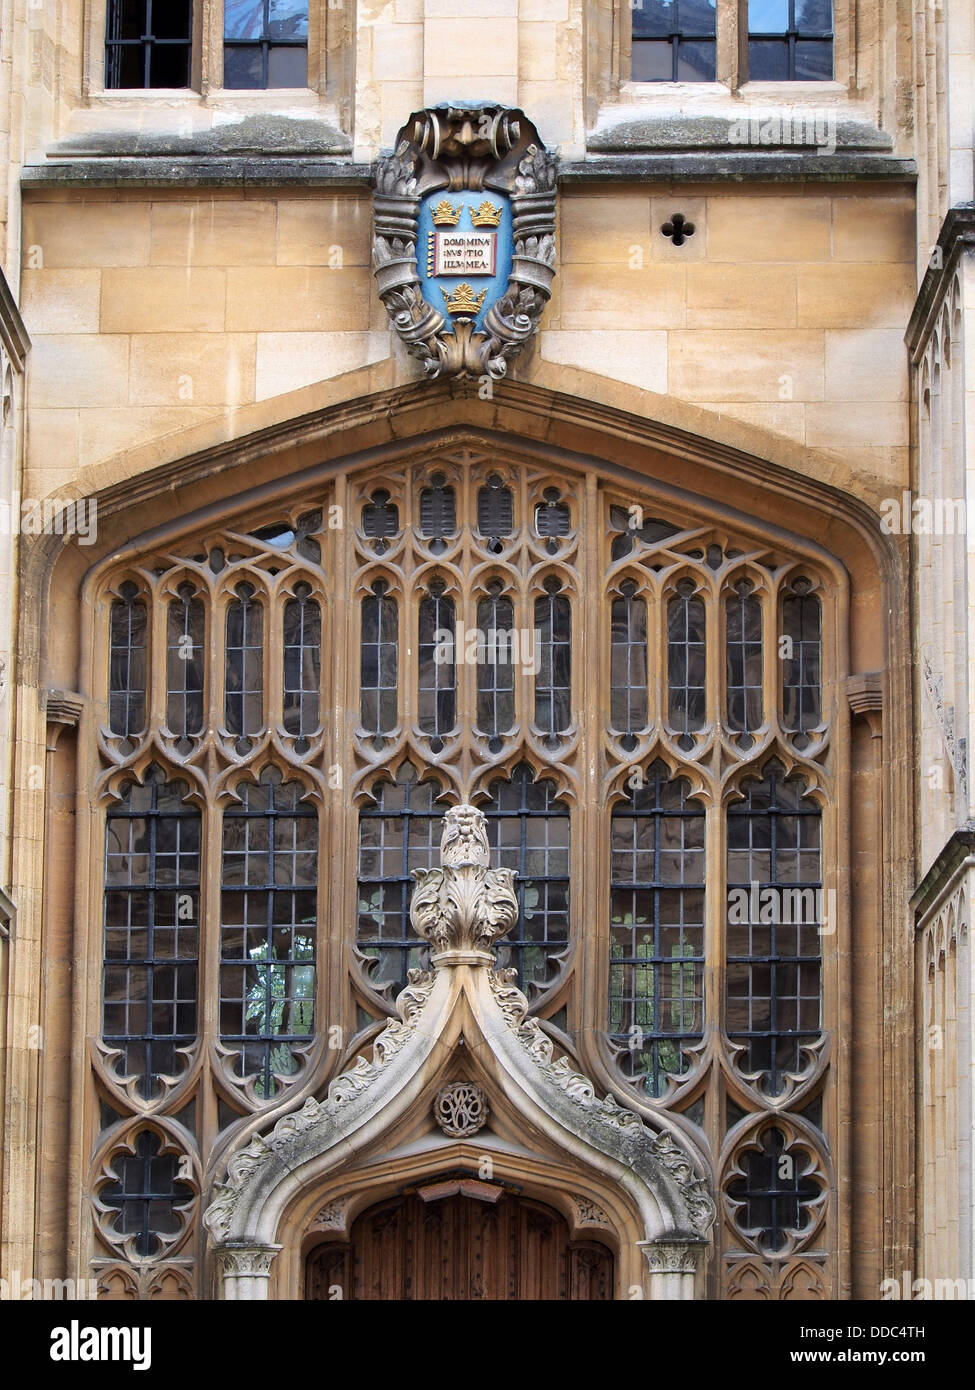 Oxford University, Divinity School, detail of windows from the outside Stock Photo